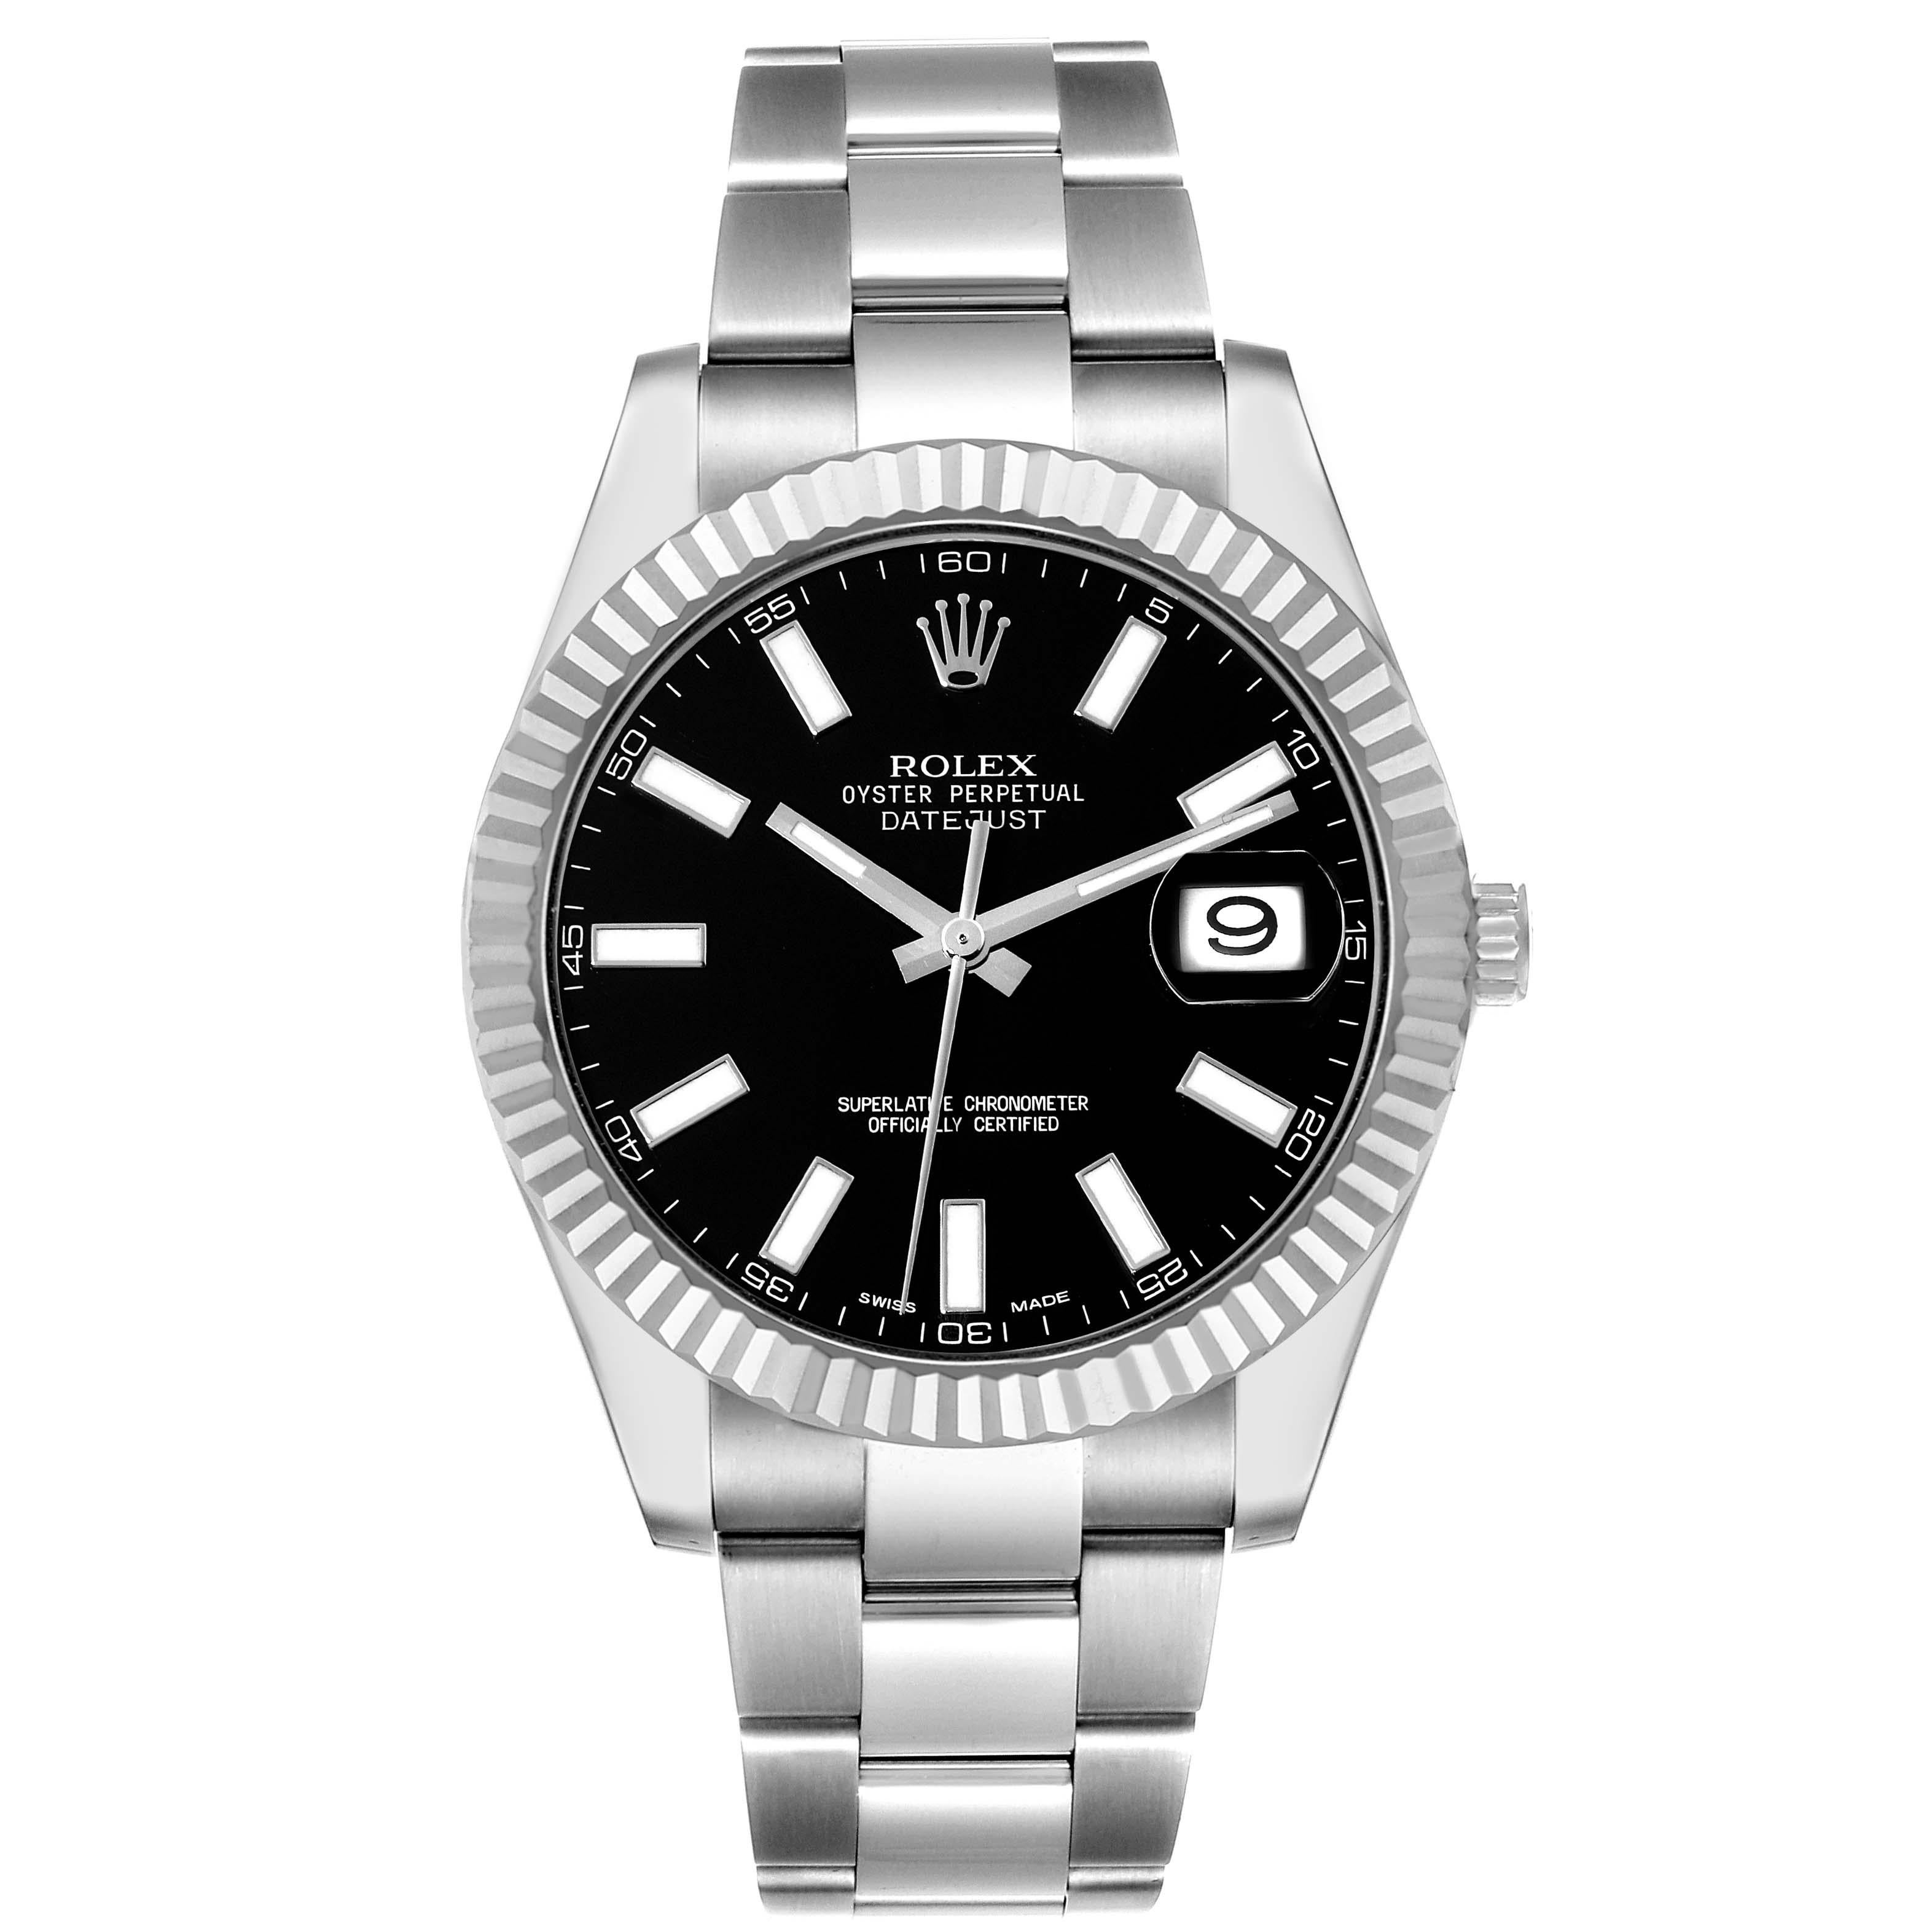 Rolex Datejust II 41mm Steel White Gold Black Dial Mens Watch 116334 For Sale 2